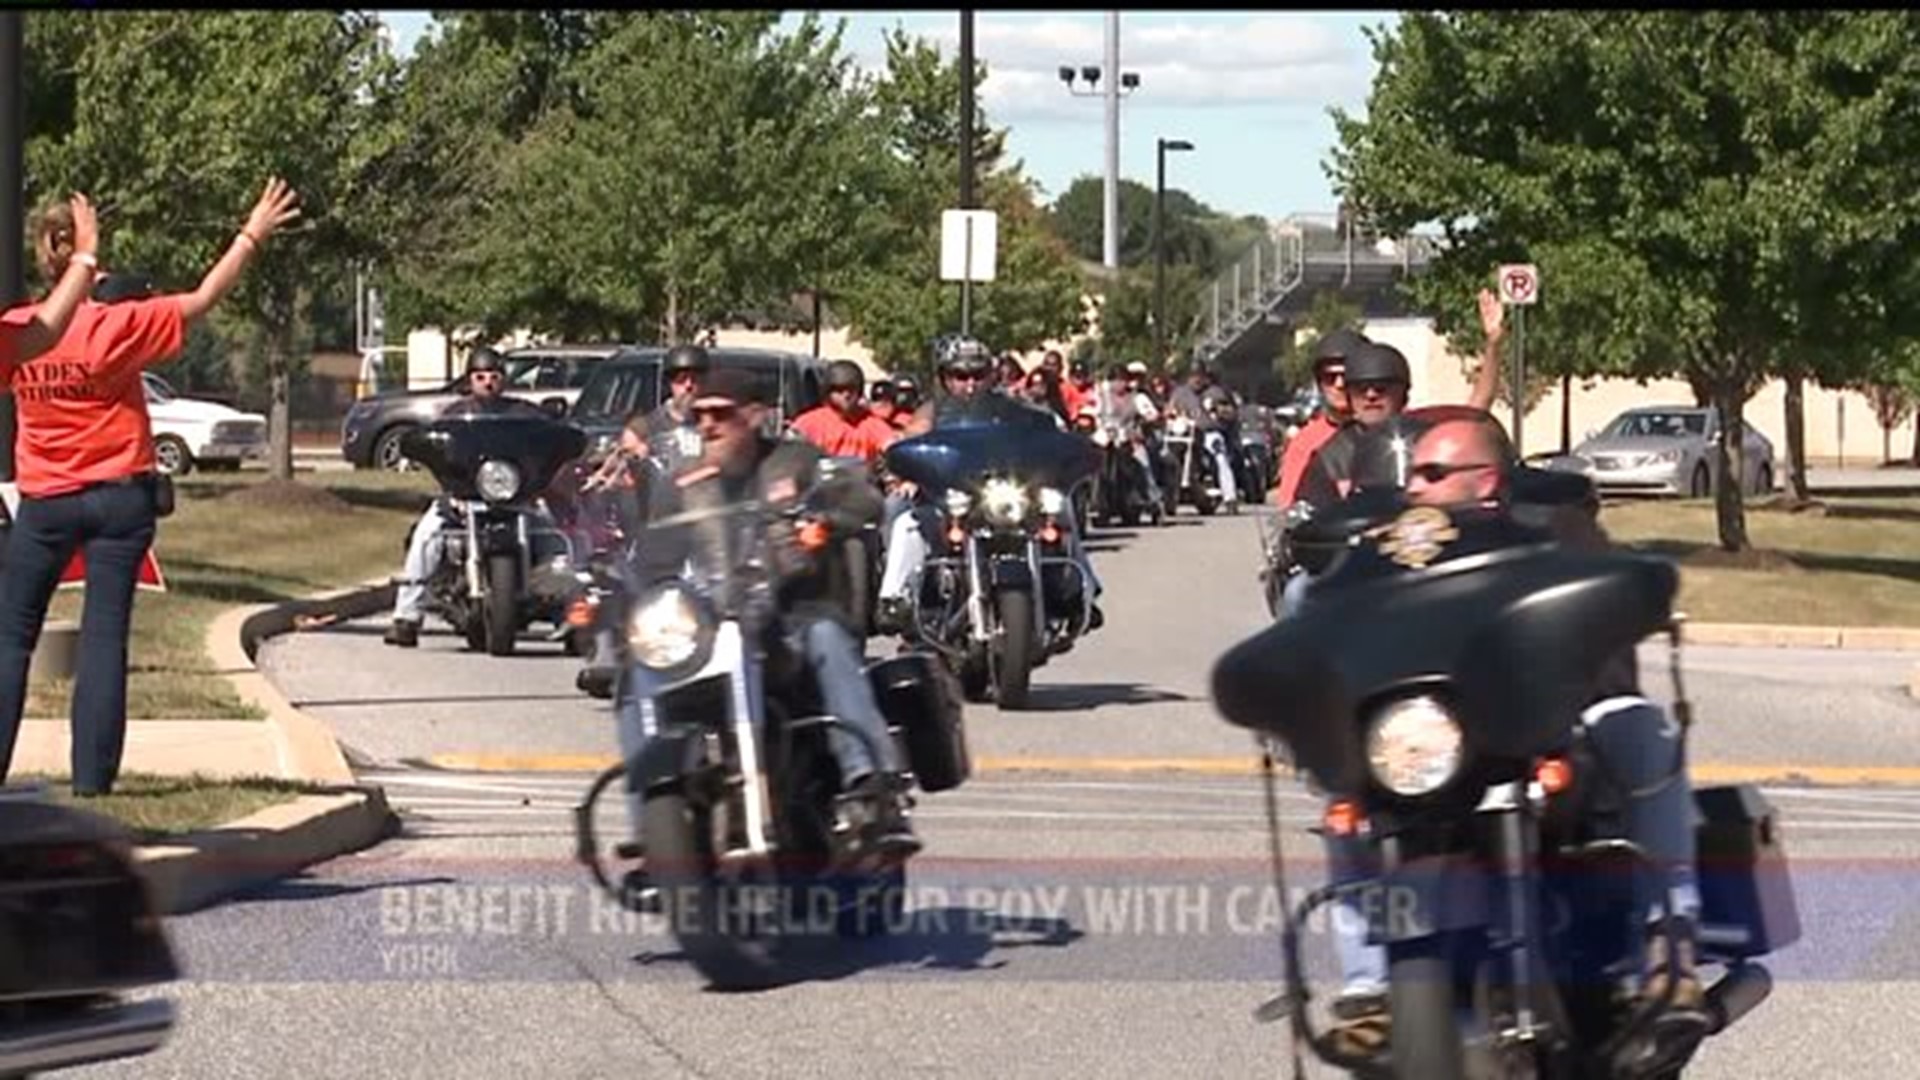 Motorcycle ride benefits local boy with brain cancer